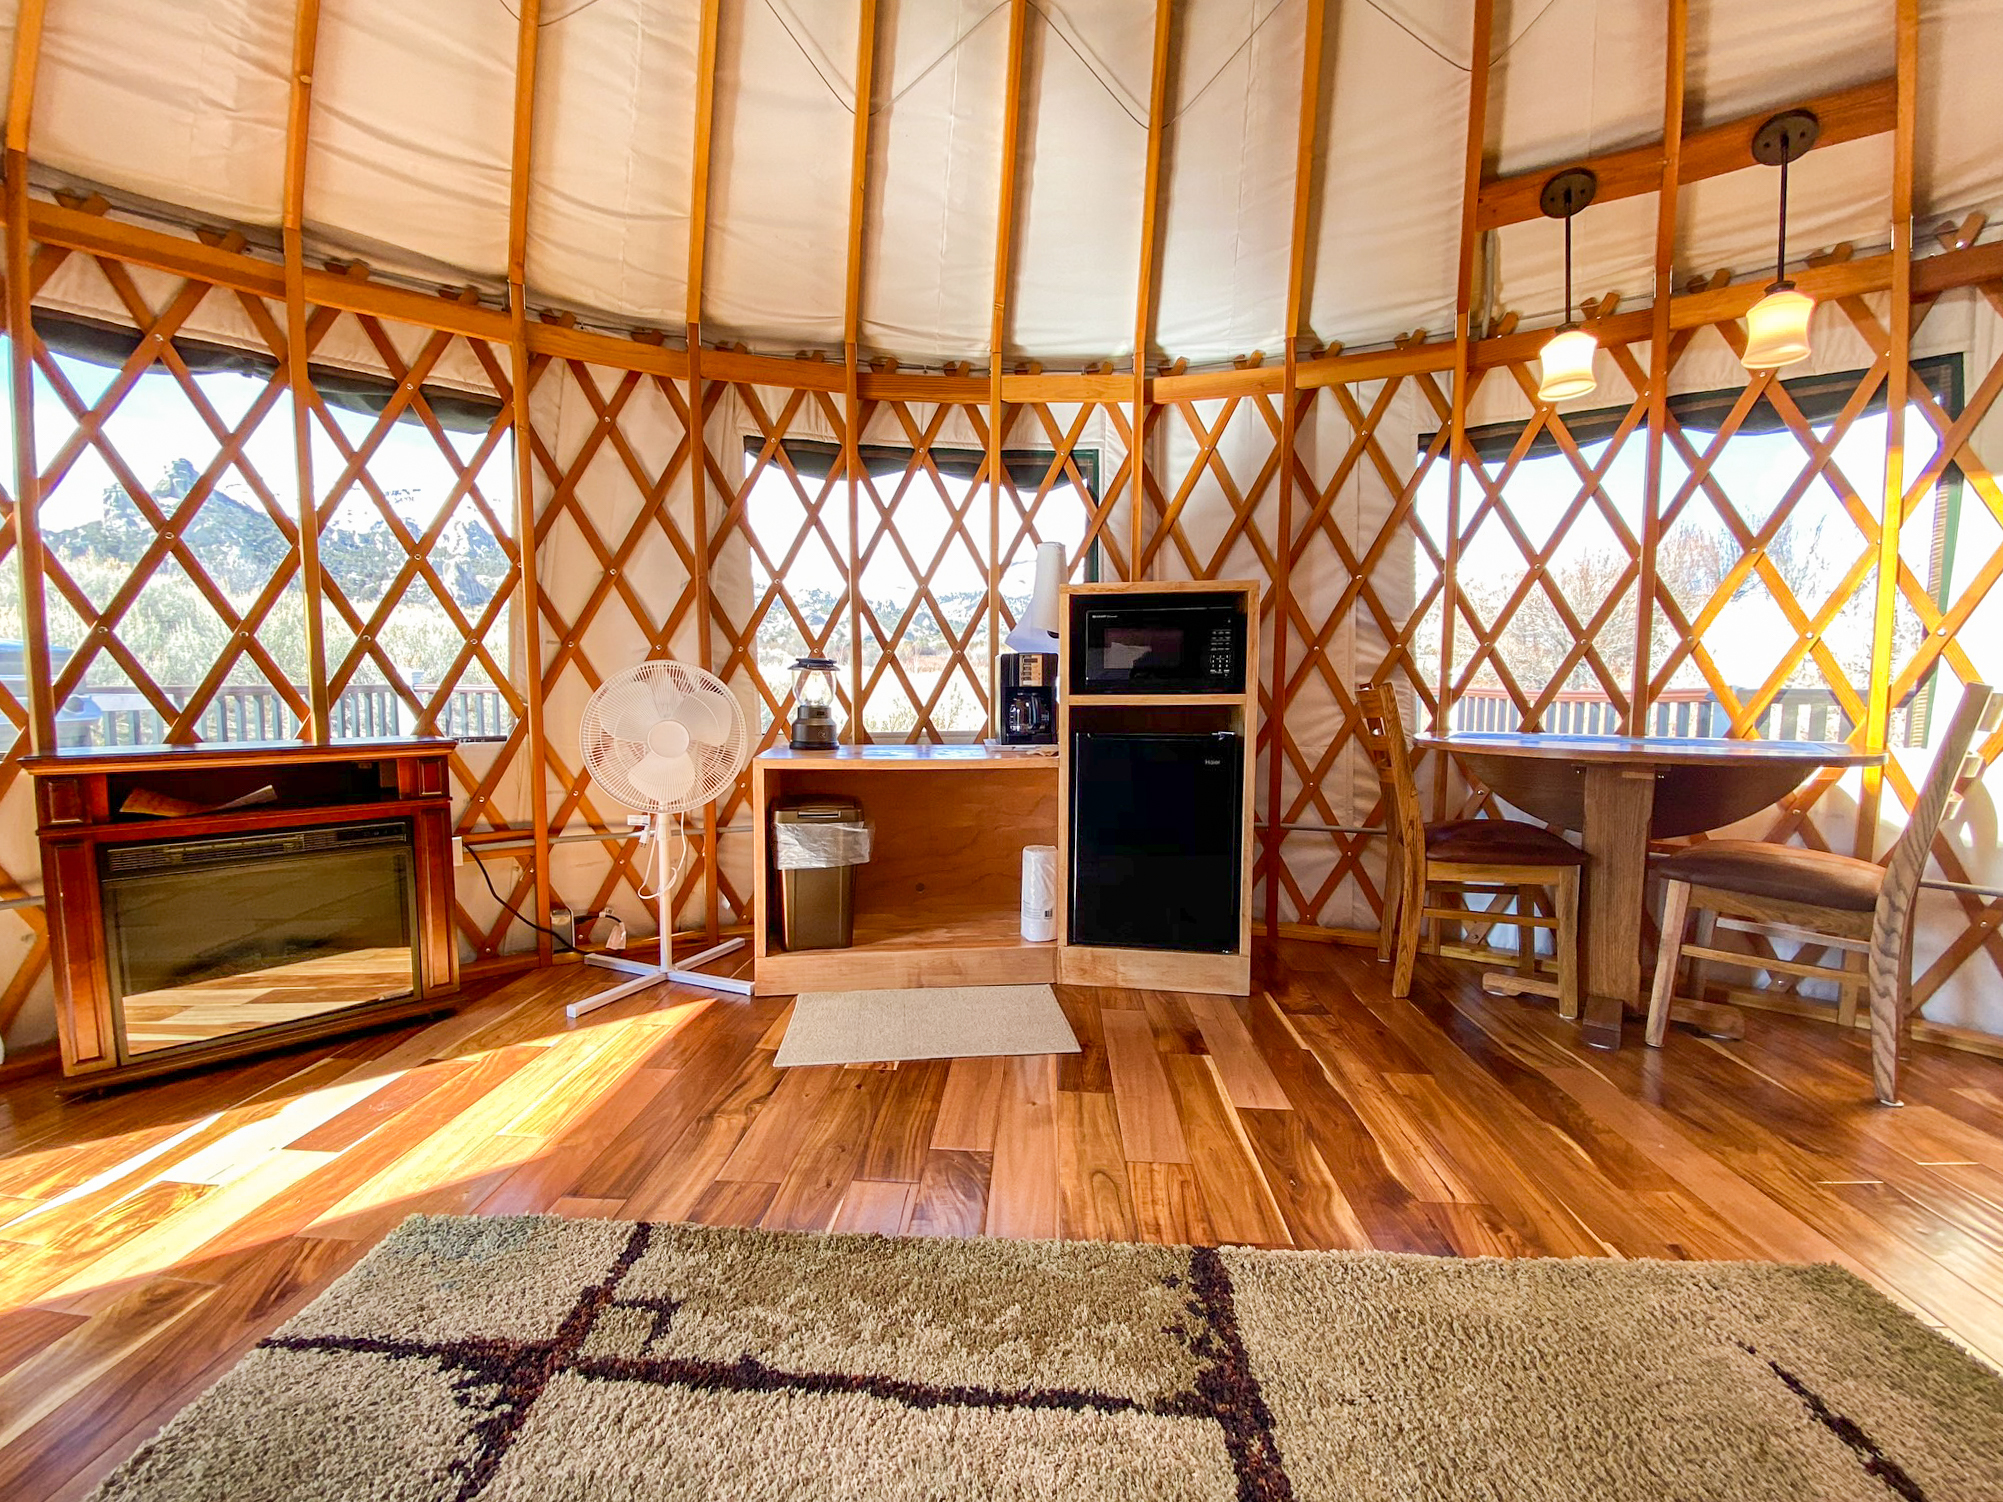 Mini fridge, microwave, coffee station, table with two chairs, fan, and fireplace style heater. Round yurt structure. It has a clear dome on the ceiling, exposed wood beam ceiling and exposed wood lattice wall supports. 